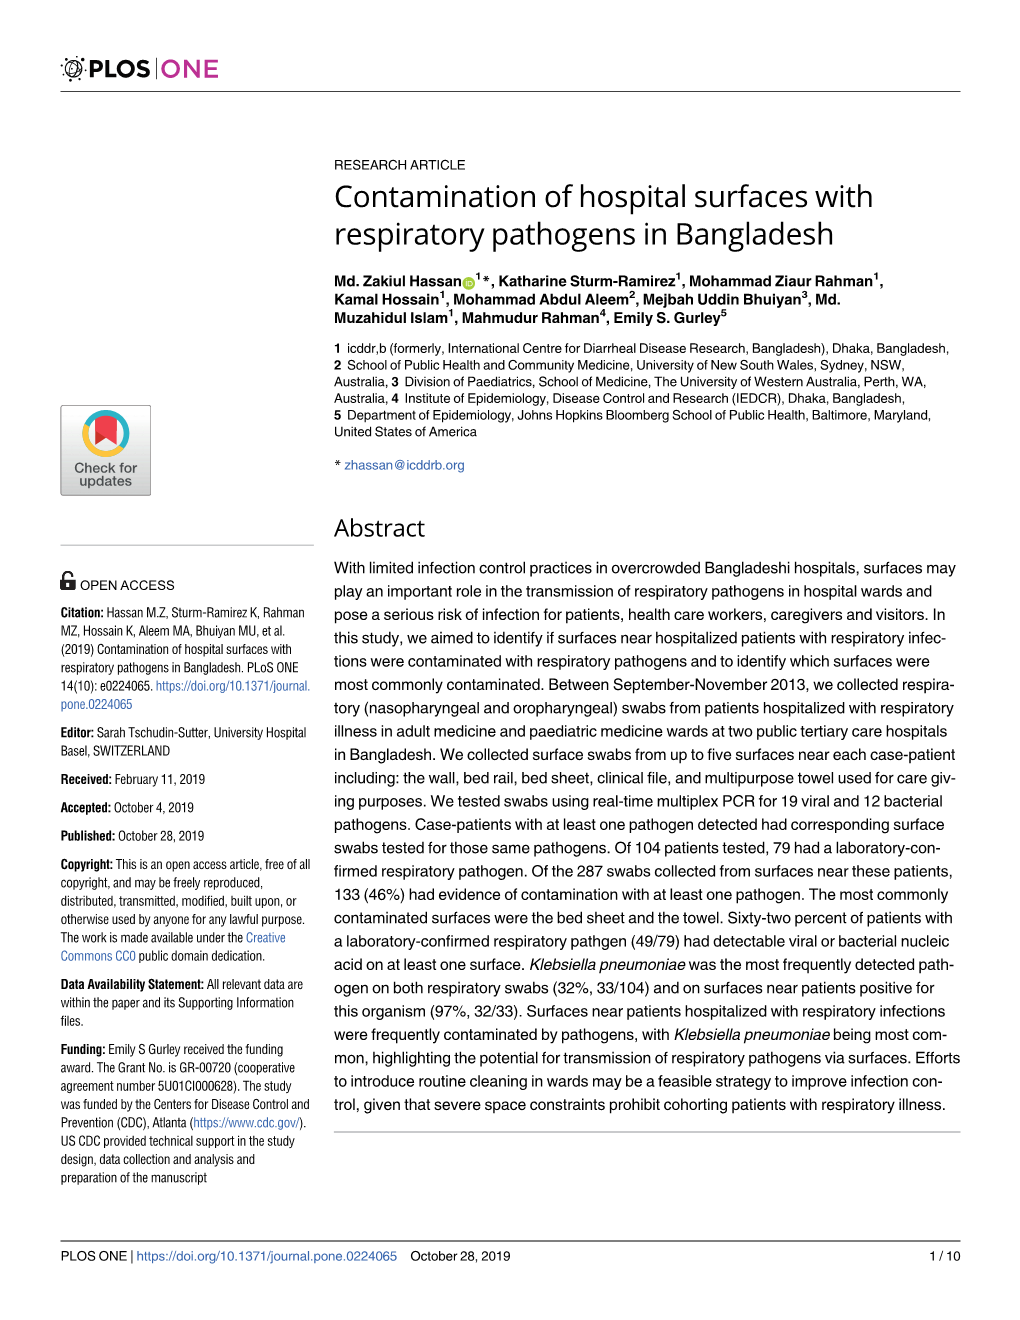 Contamination of Hospital Surfaces with Respiratory Pathogens in Bangladesh